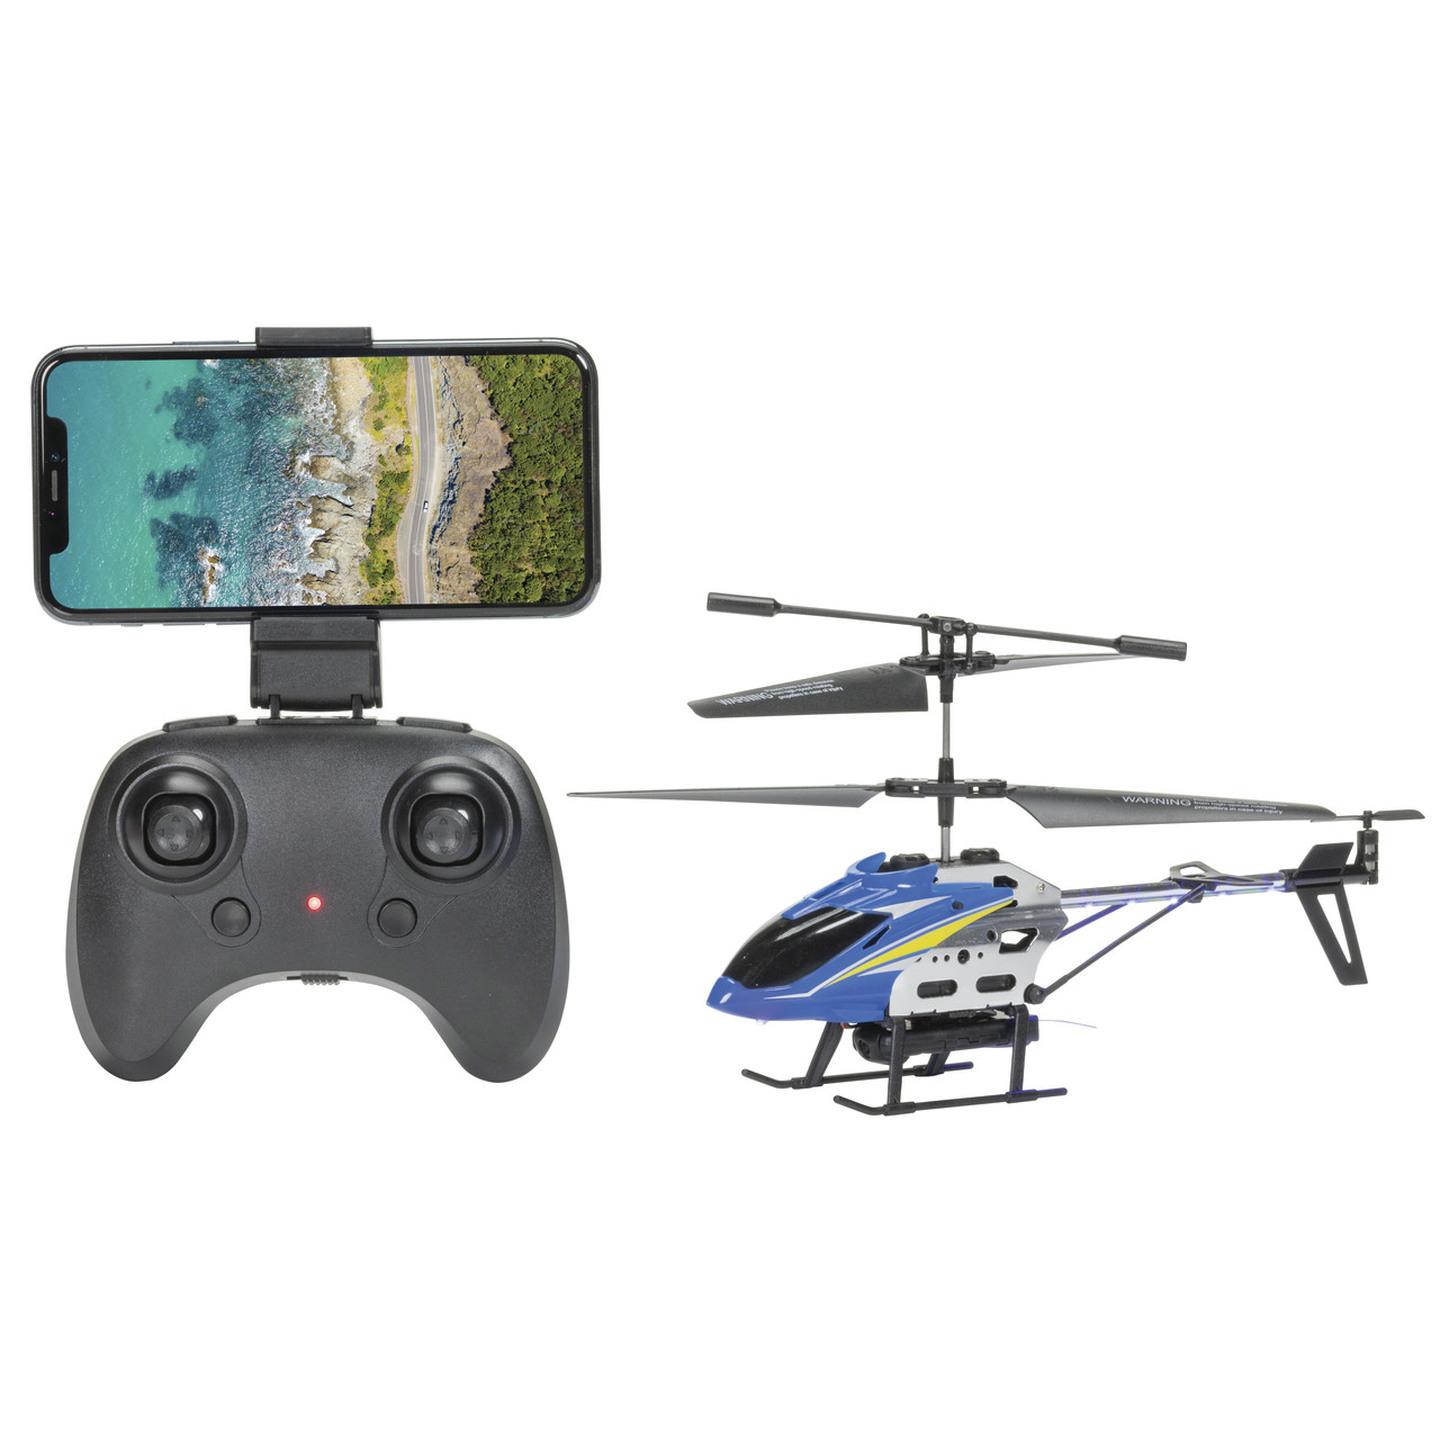 3.5CH FPV R/C Helicopter with 720p Camera